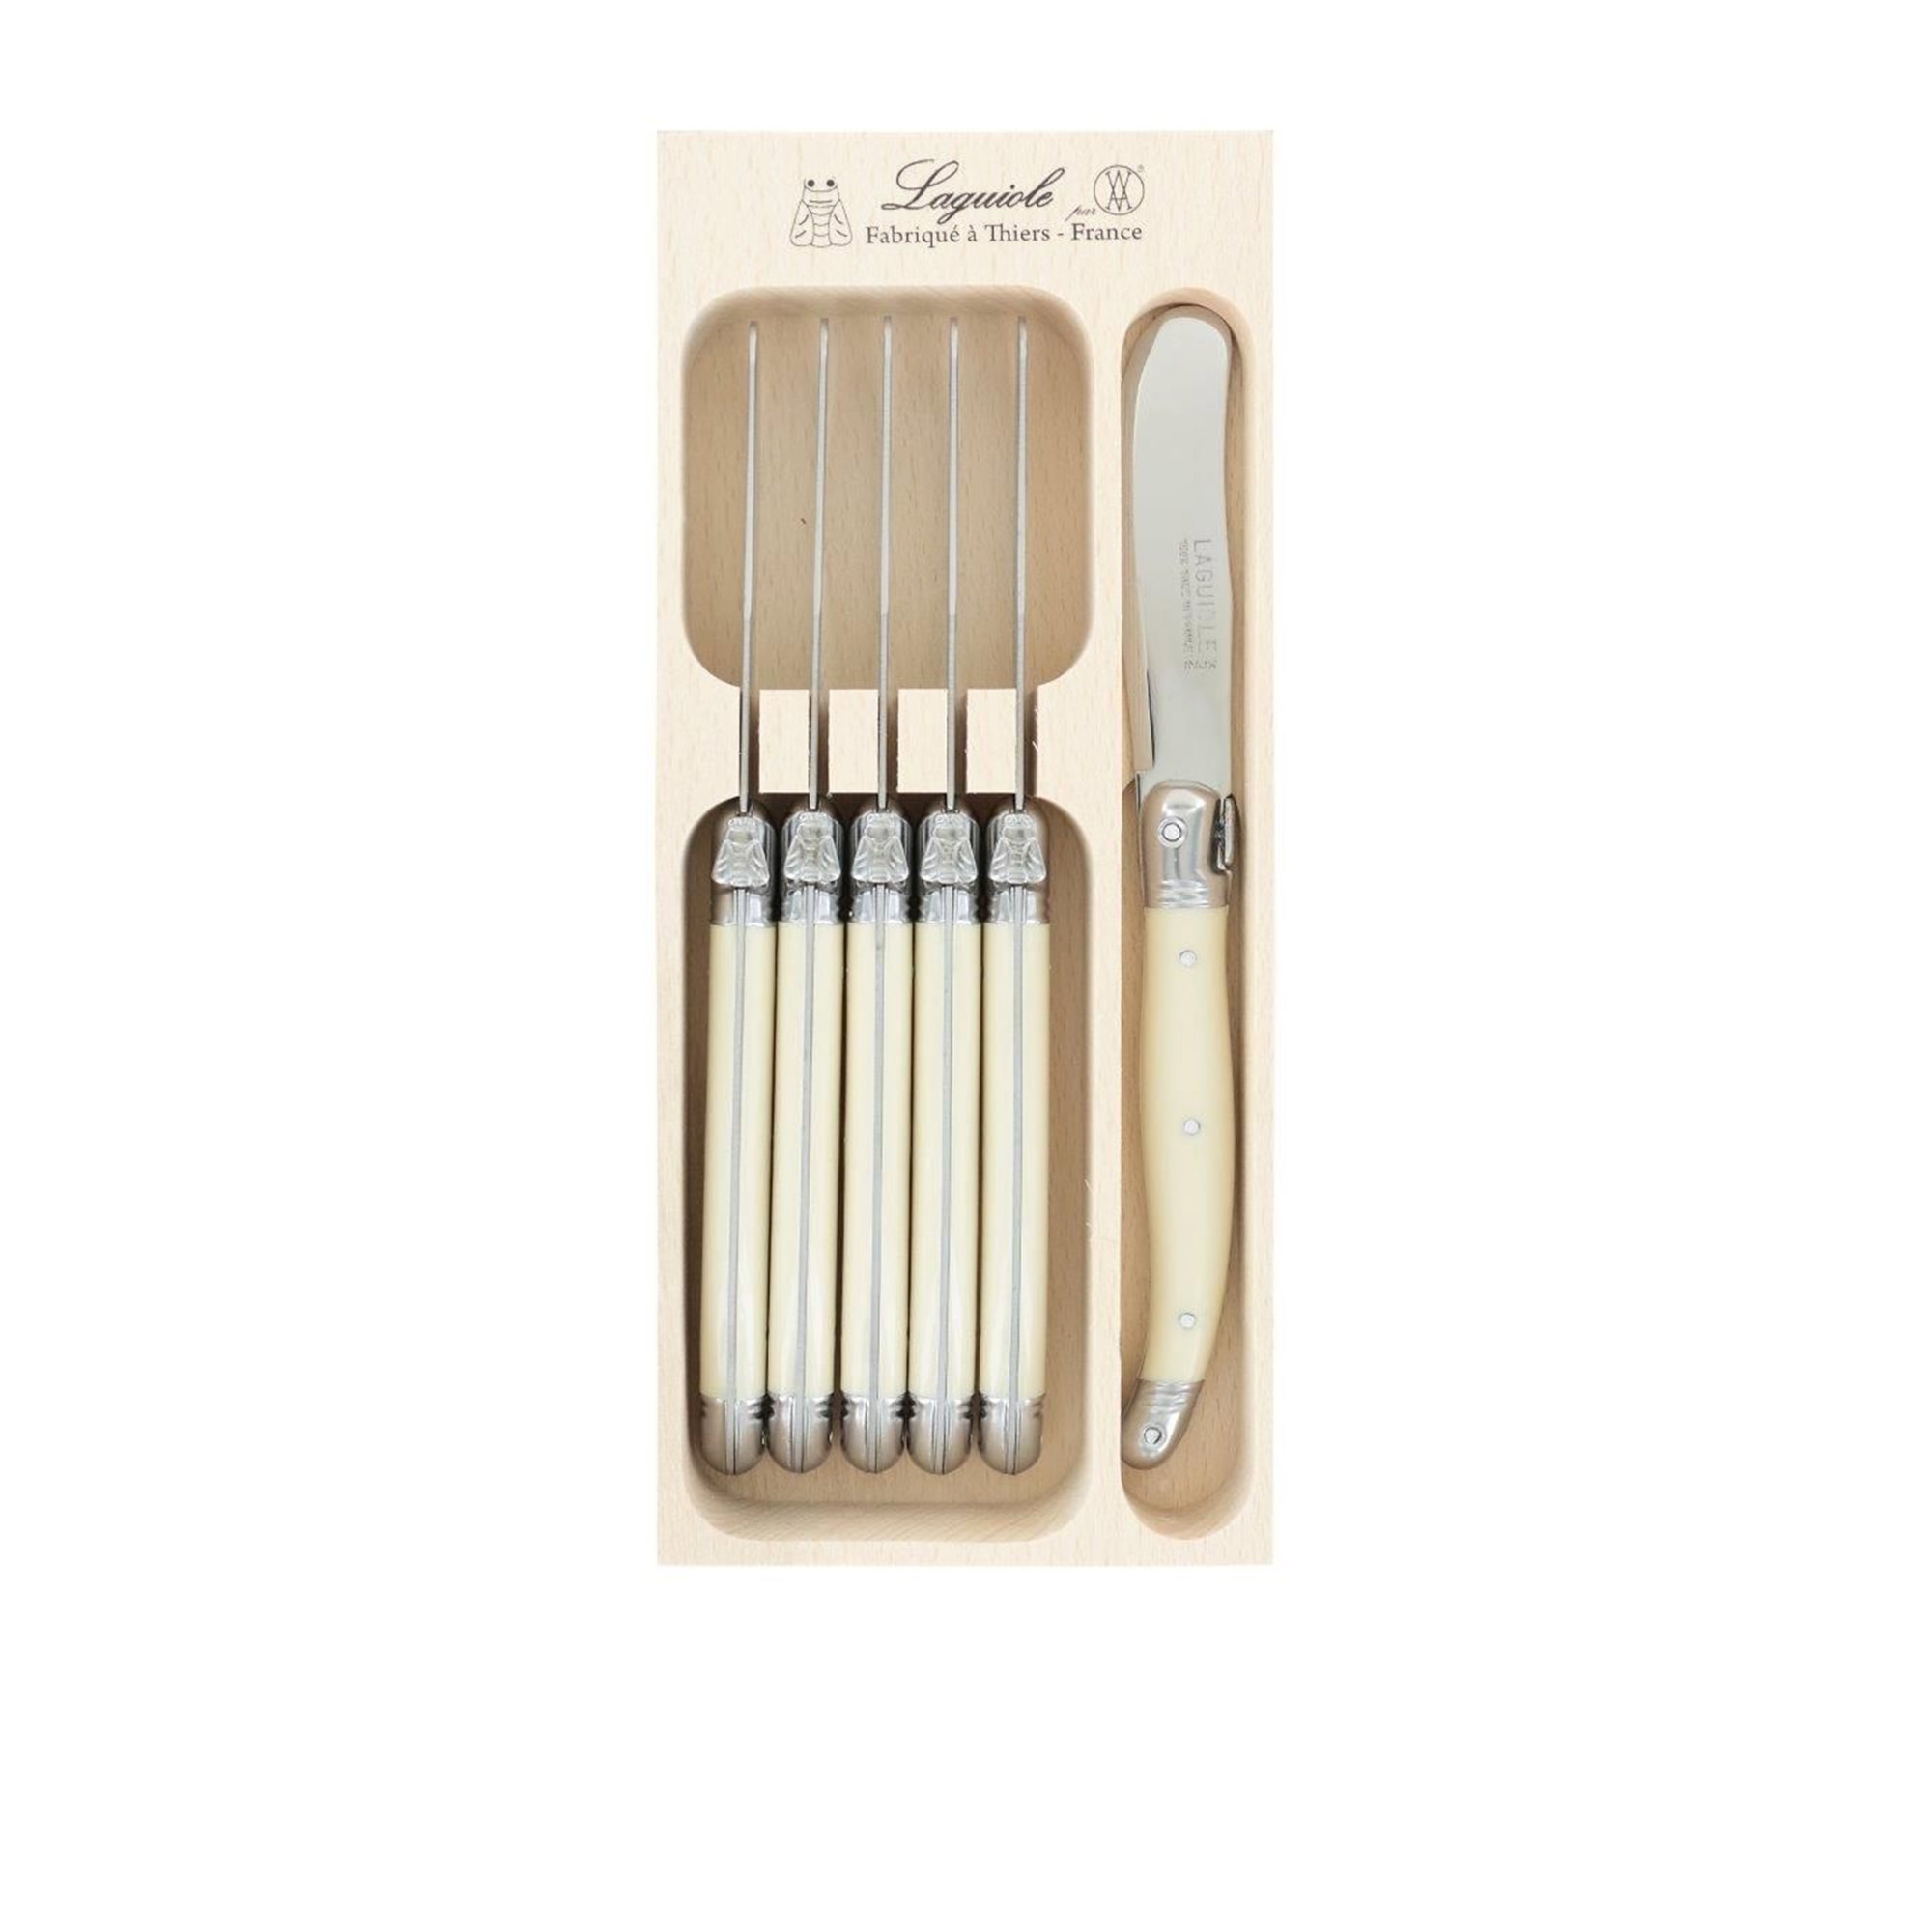 Laguiole by Andre Verdier Debutant Butter Knife Set of 6 Ivory Image 1